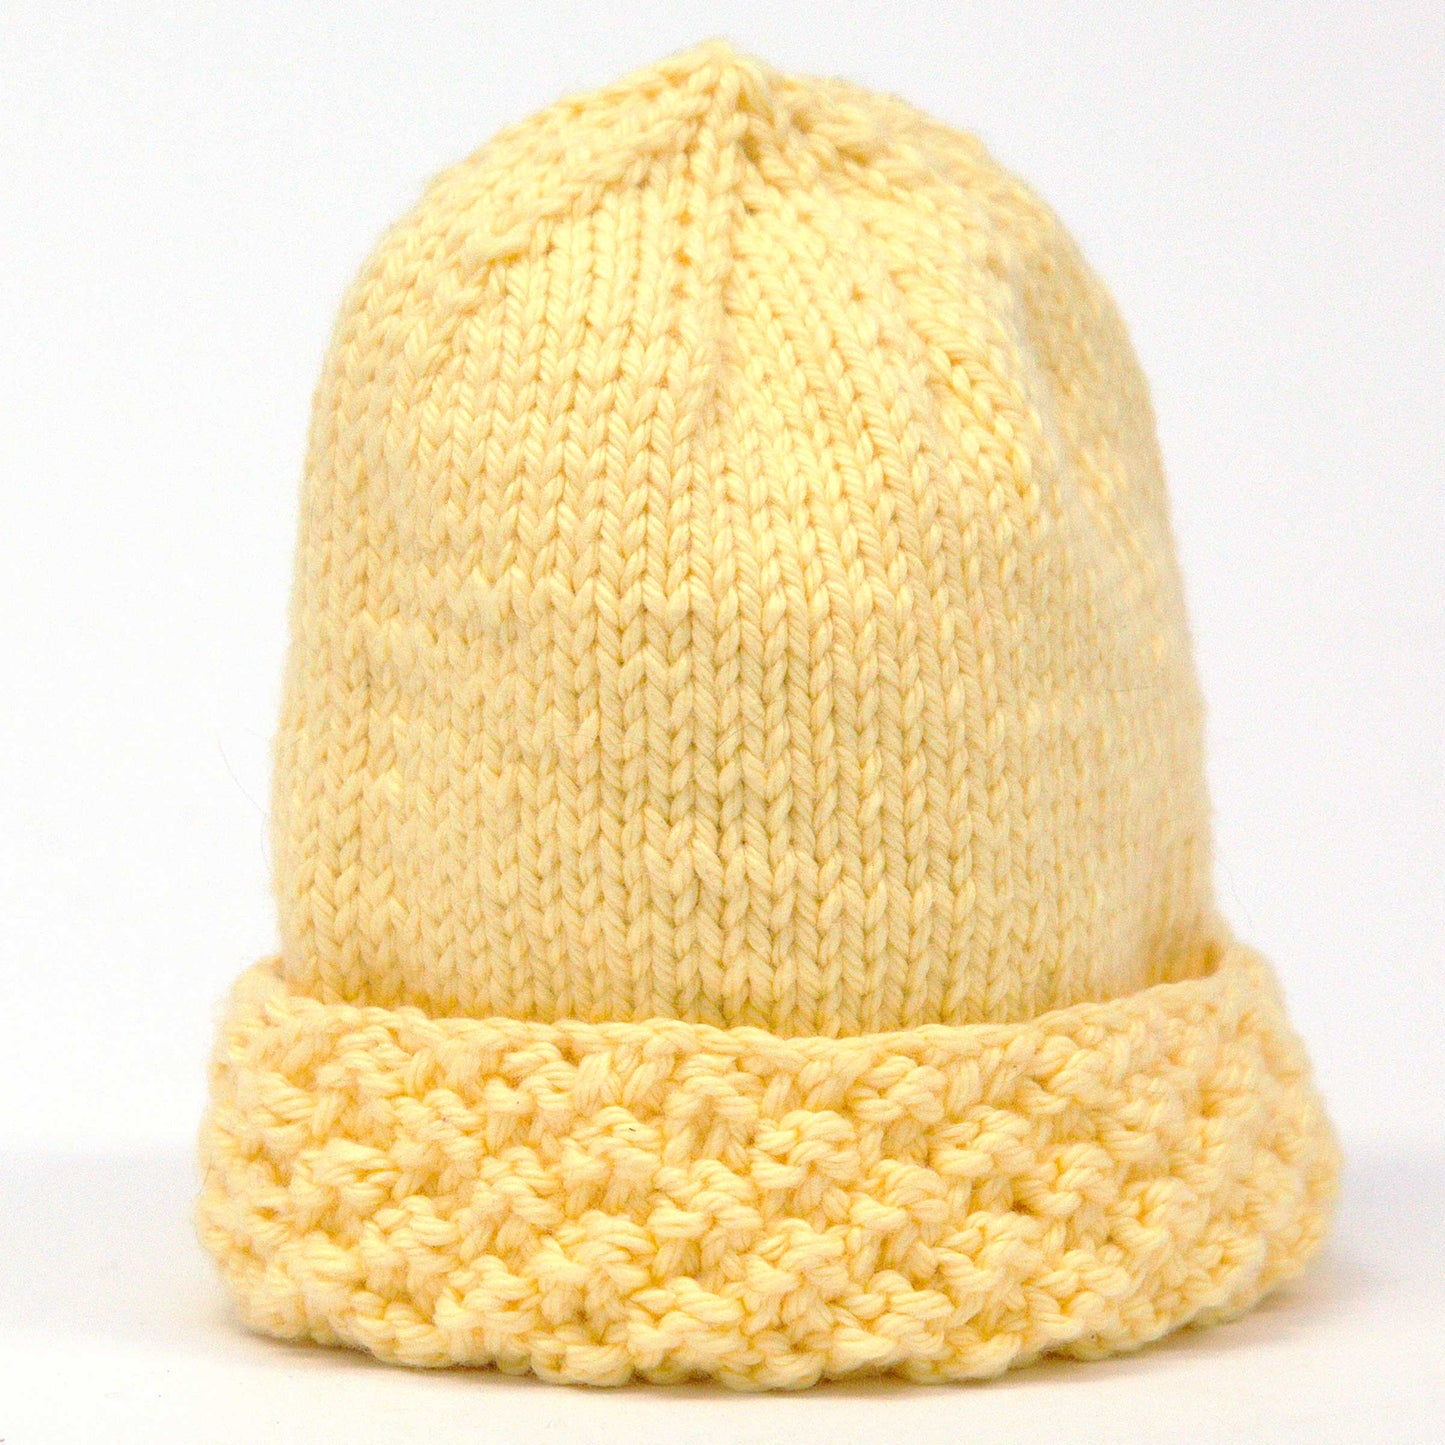 Knitted Baby Hat, Hand Knit, 100% Cotton, Washable, Lt. Yellow